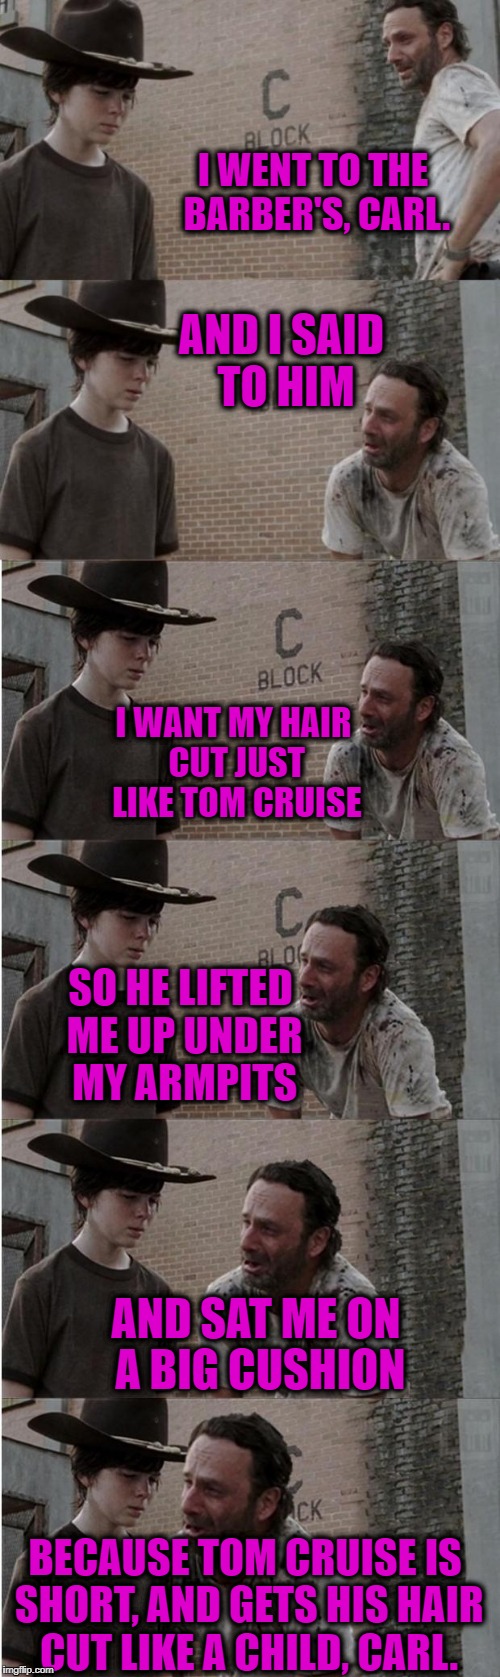 Tom Cruise Haircut | I WENT TO THE BARBER'S, CARL. AND I SAID TO HIM; I WANT MY HAIR CUT JUST LIKE TOM CRUISE; SO HE LIFTED ME UP UNDER MY ARMPITS; AND SAT ME ON A BIG CUSHION; BECAUSE TOM CRUISE IS SHORT, AND GETS HIS HAIR CUT LIKE A CHILD, CARL. | image tagged in memes,rick and carl longer | made w/ Imgflip meme maker